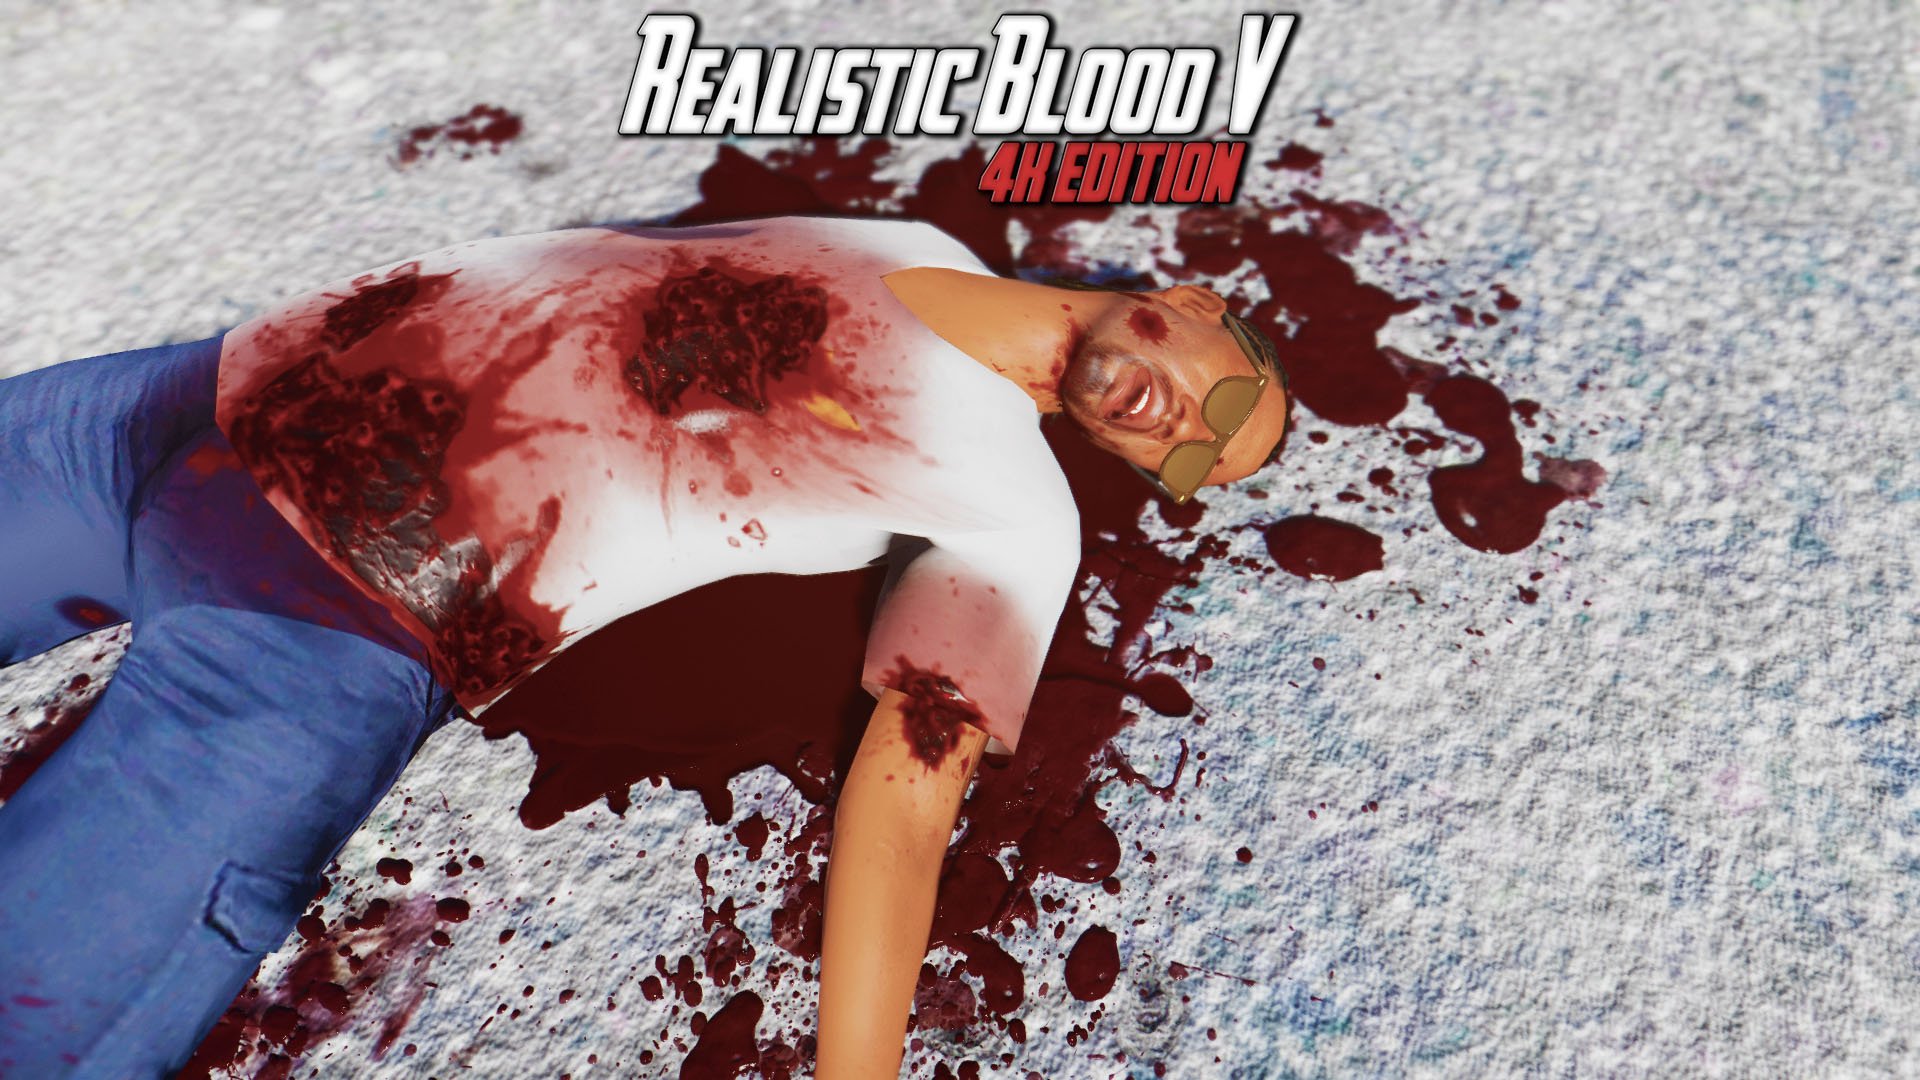 Gore and blood gta 5 фото 32